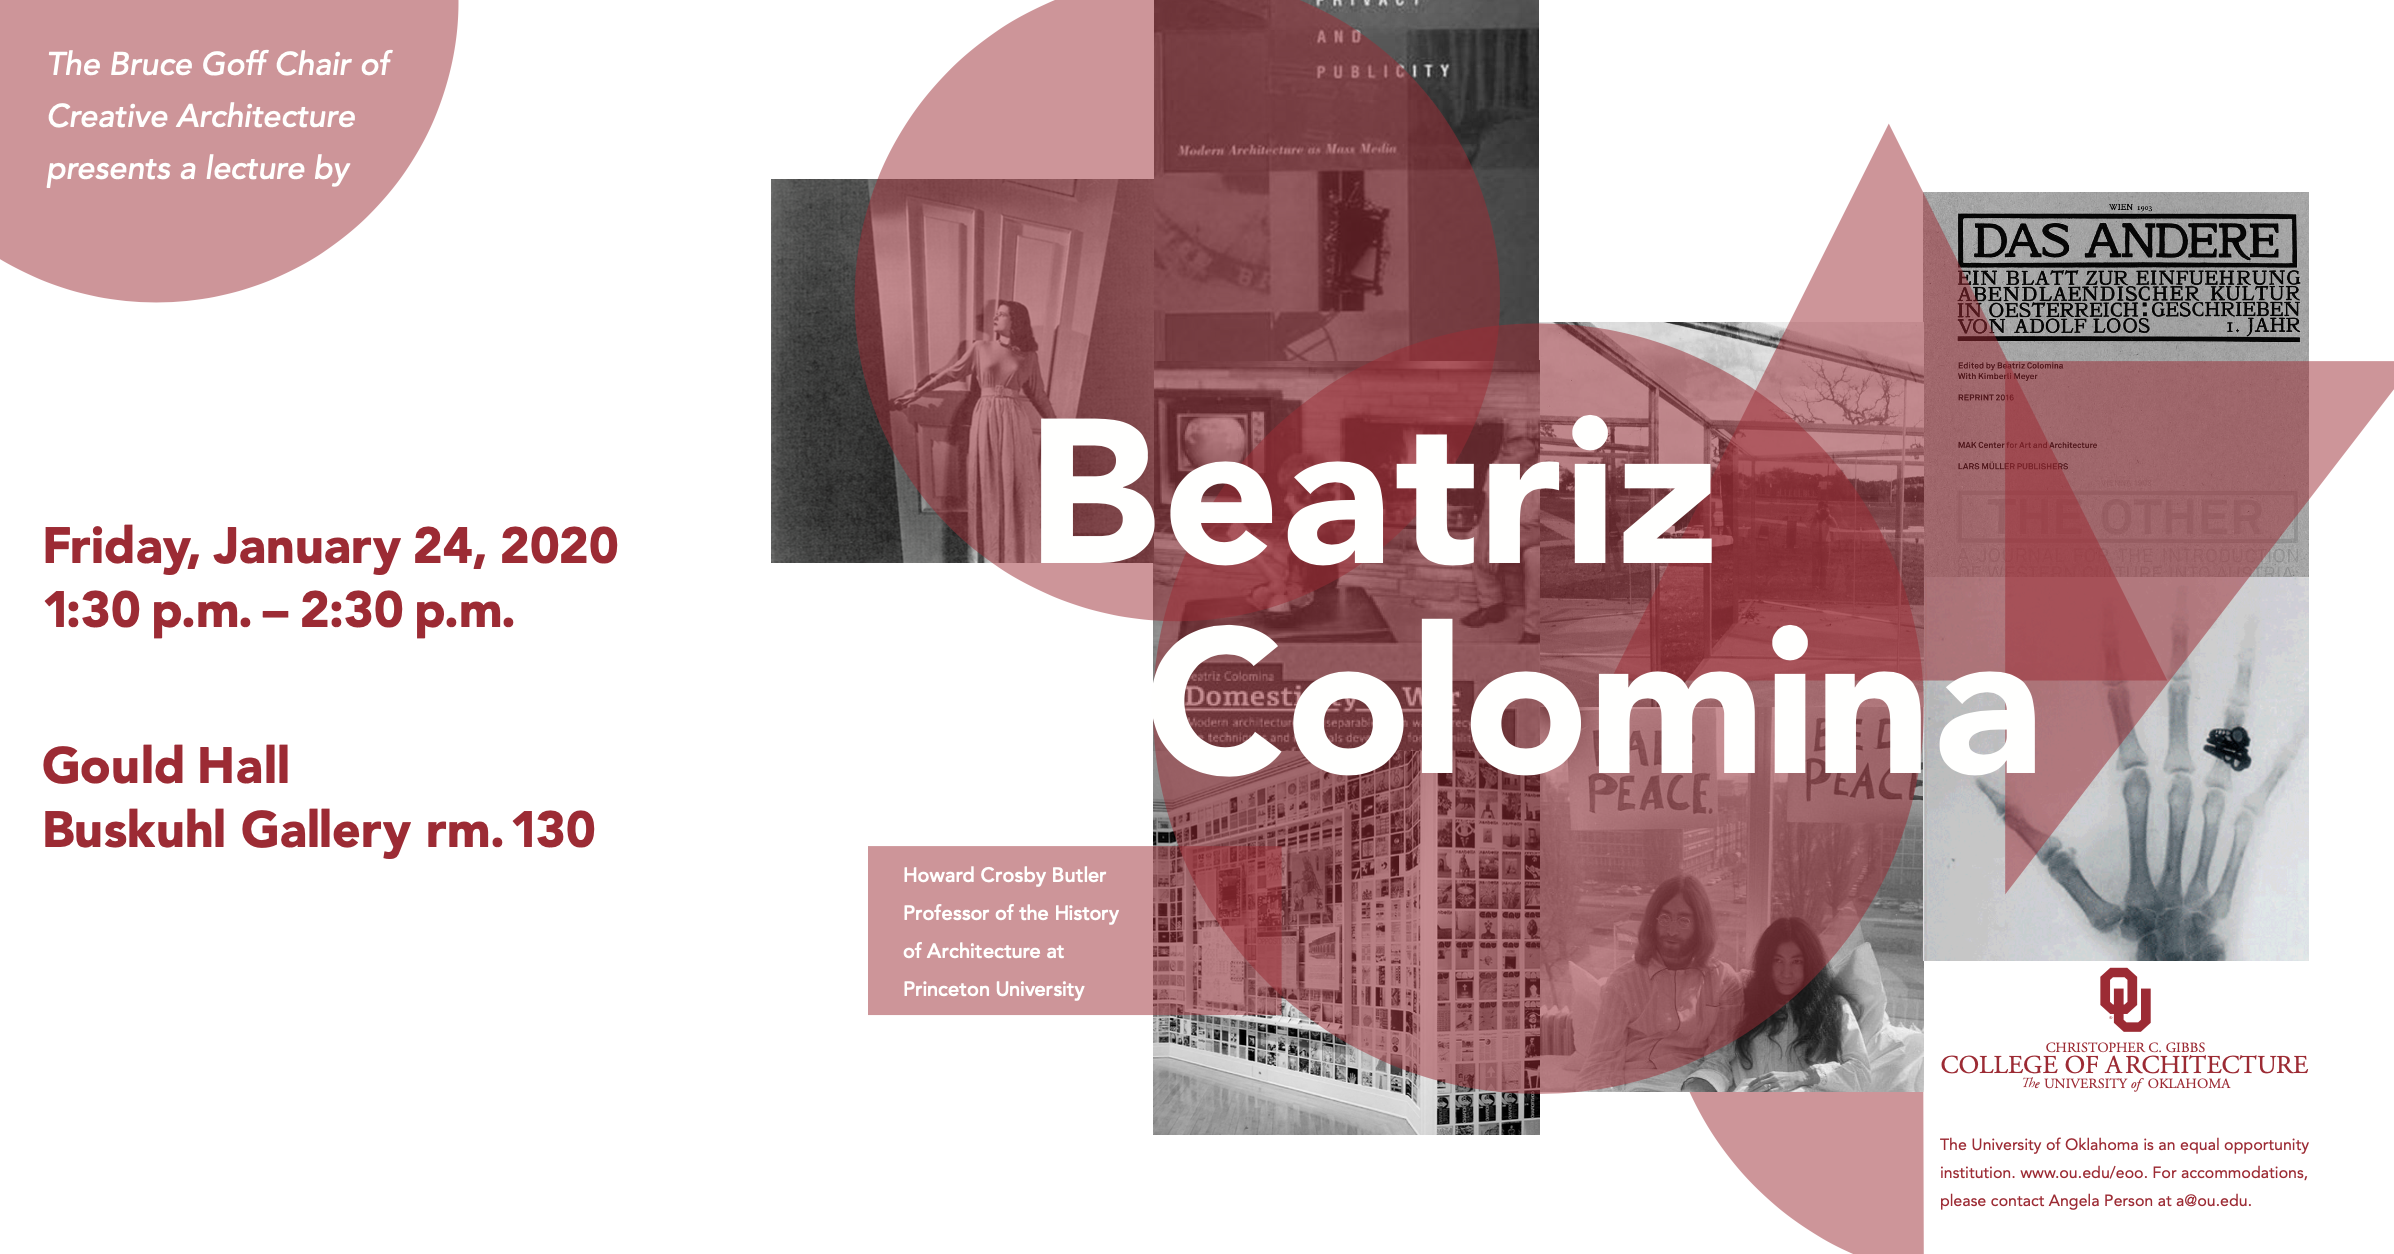 Beatriz Colomina to Lecture at Gibbs College of Architecture